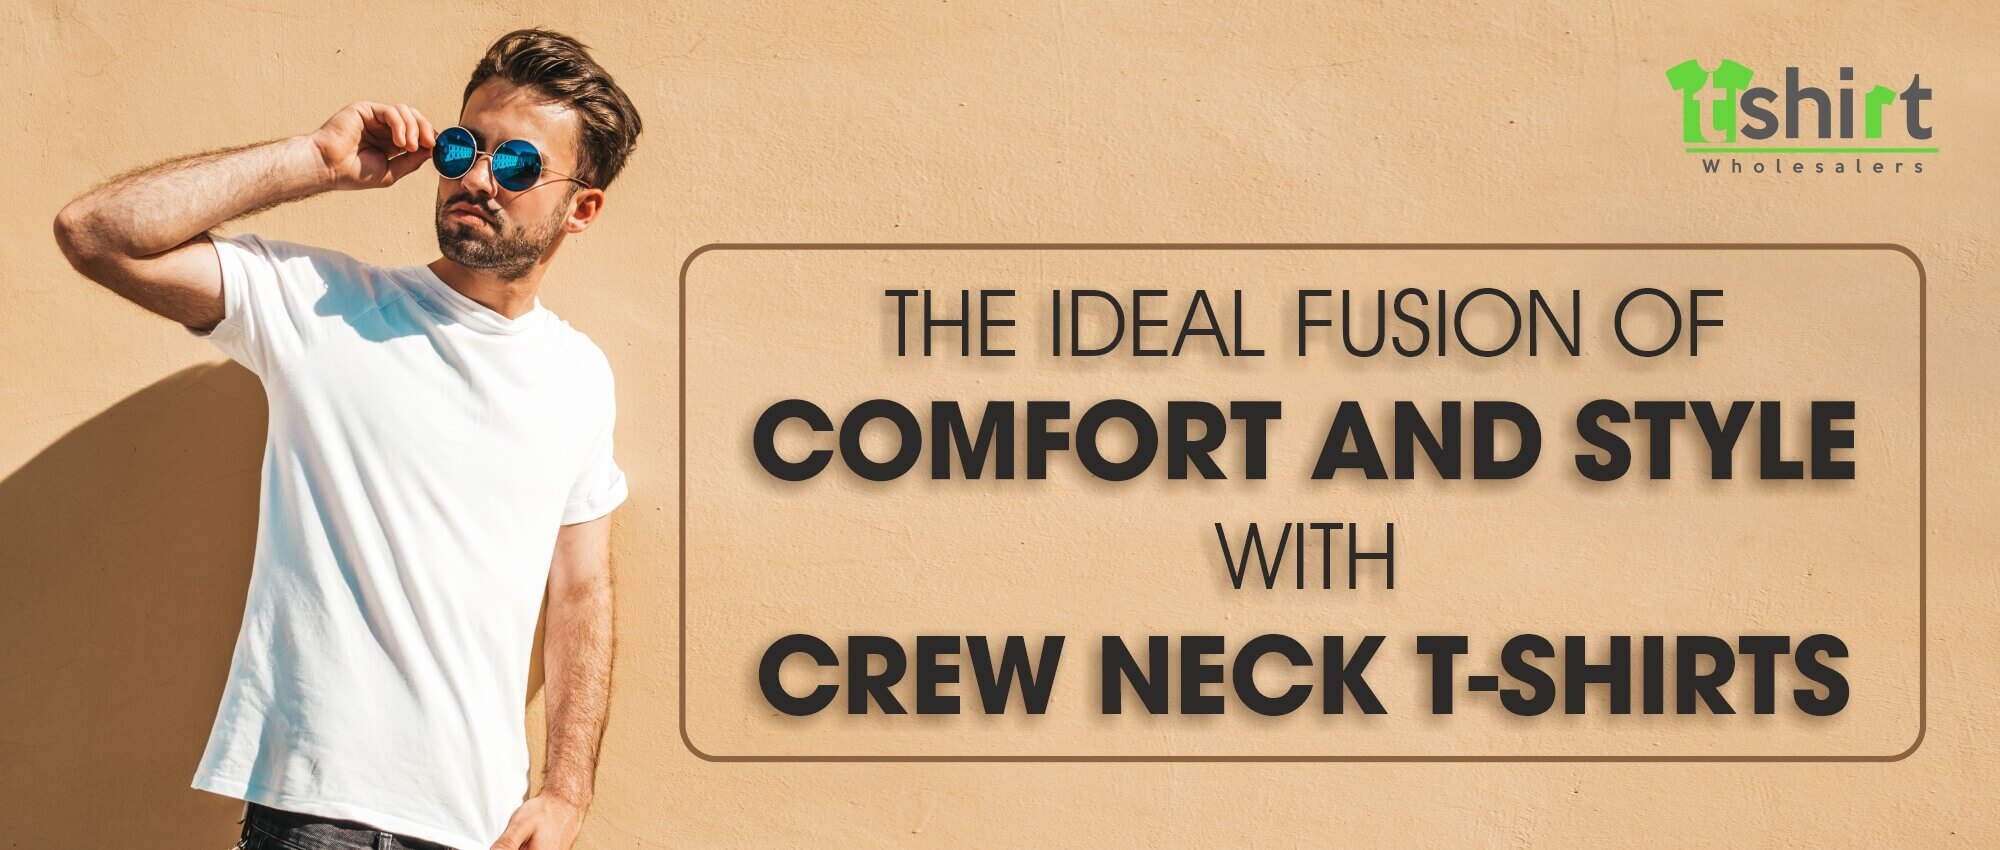 THE IDEAL FUSION OF COMFORT AND STYLE WITH CREW NECK T-SHIRTS